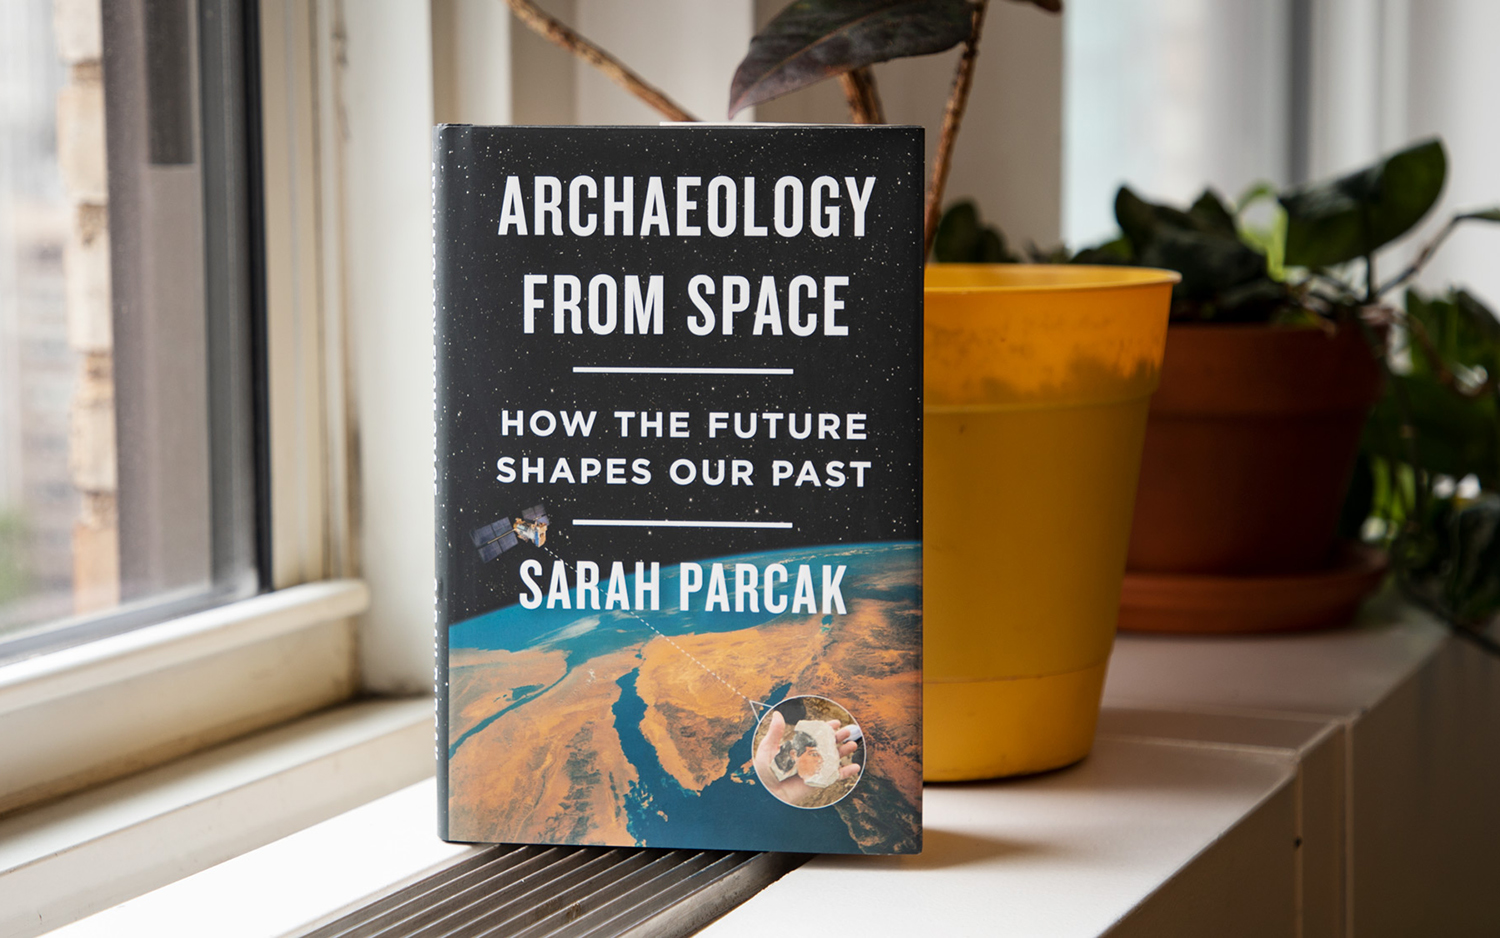 Indiana Jones Meets 'Star Wars' in 'Archaeology From Space.' Enter to Win a Copy!